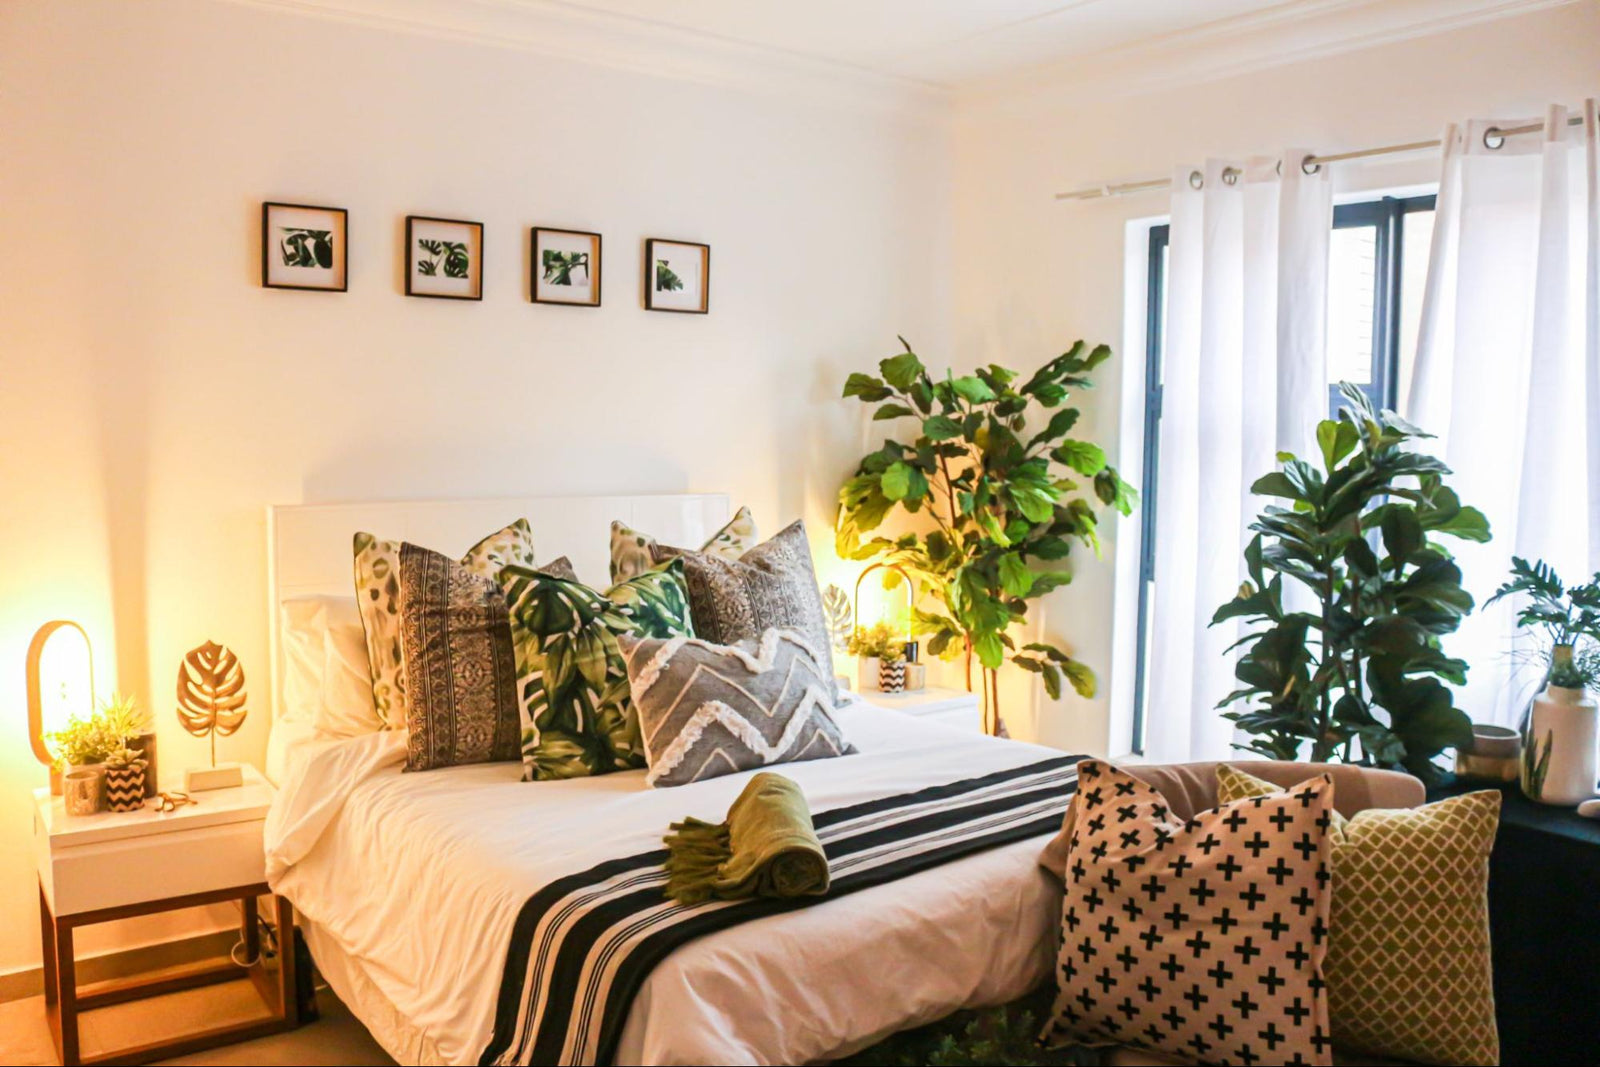 A Guide to Bringing Plants into Your Bedroom